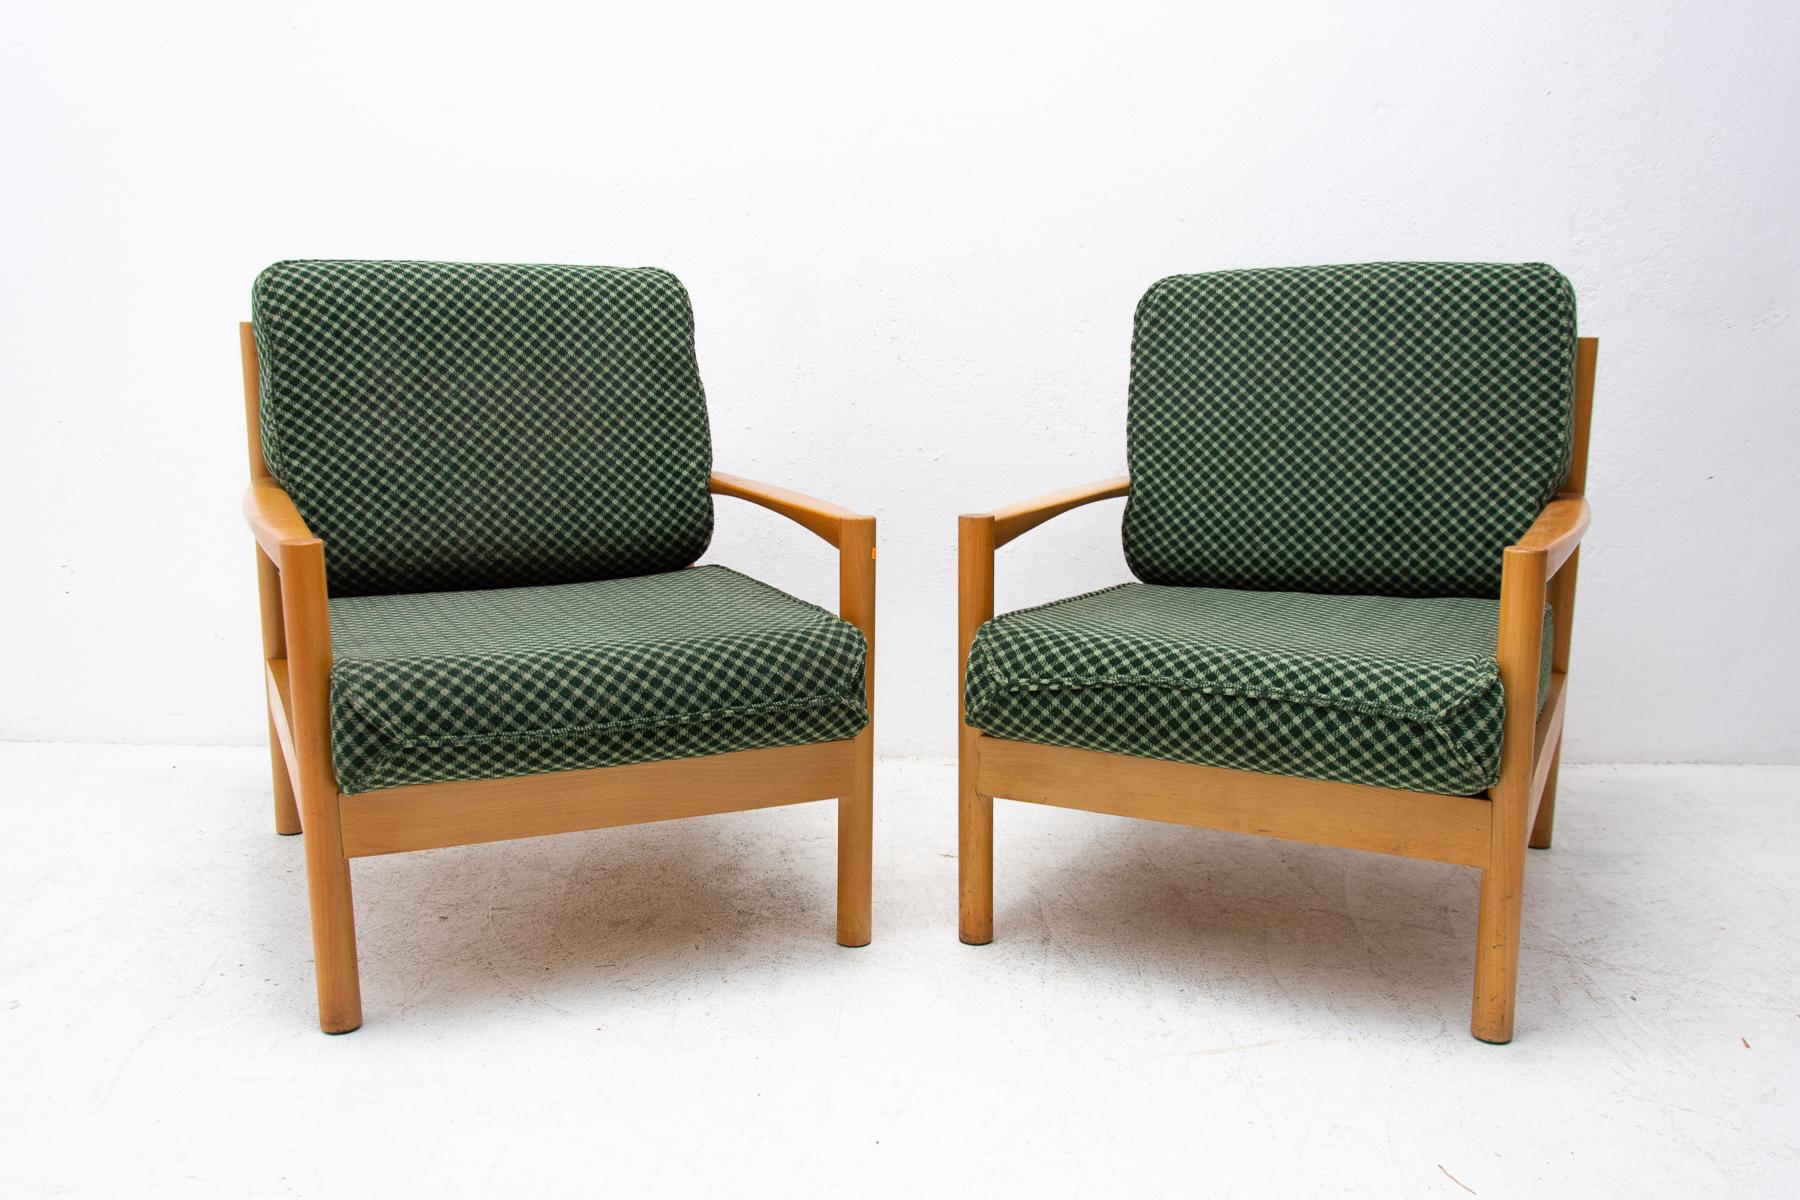 A pair of mid century armchairs in Scandinavian style, made in the 1970´s. It features beechwood structure and removable cushions in very good condition. The chairs are fully functional, but it can shows signs of age and using. Overall in very good